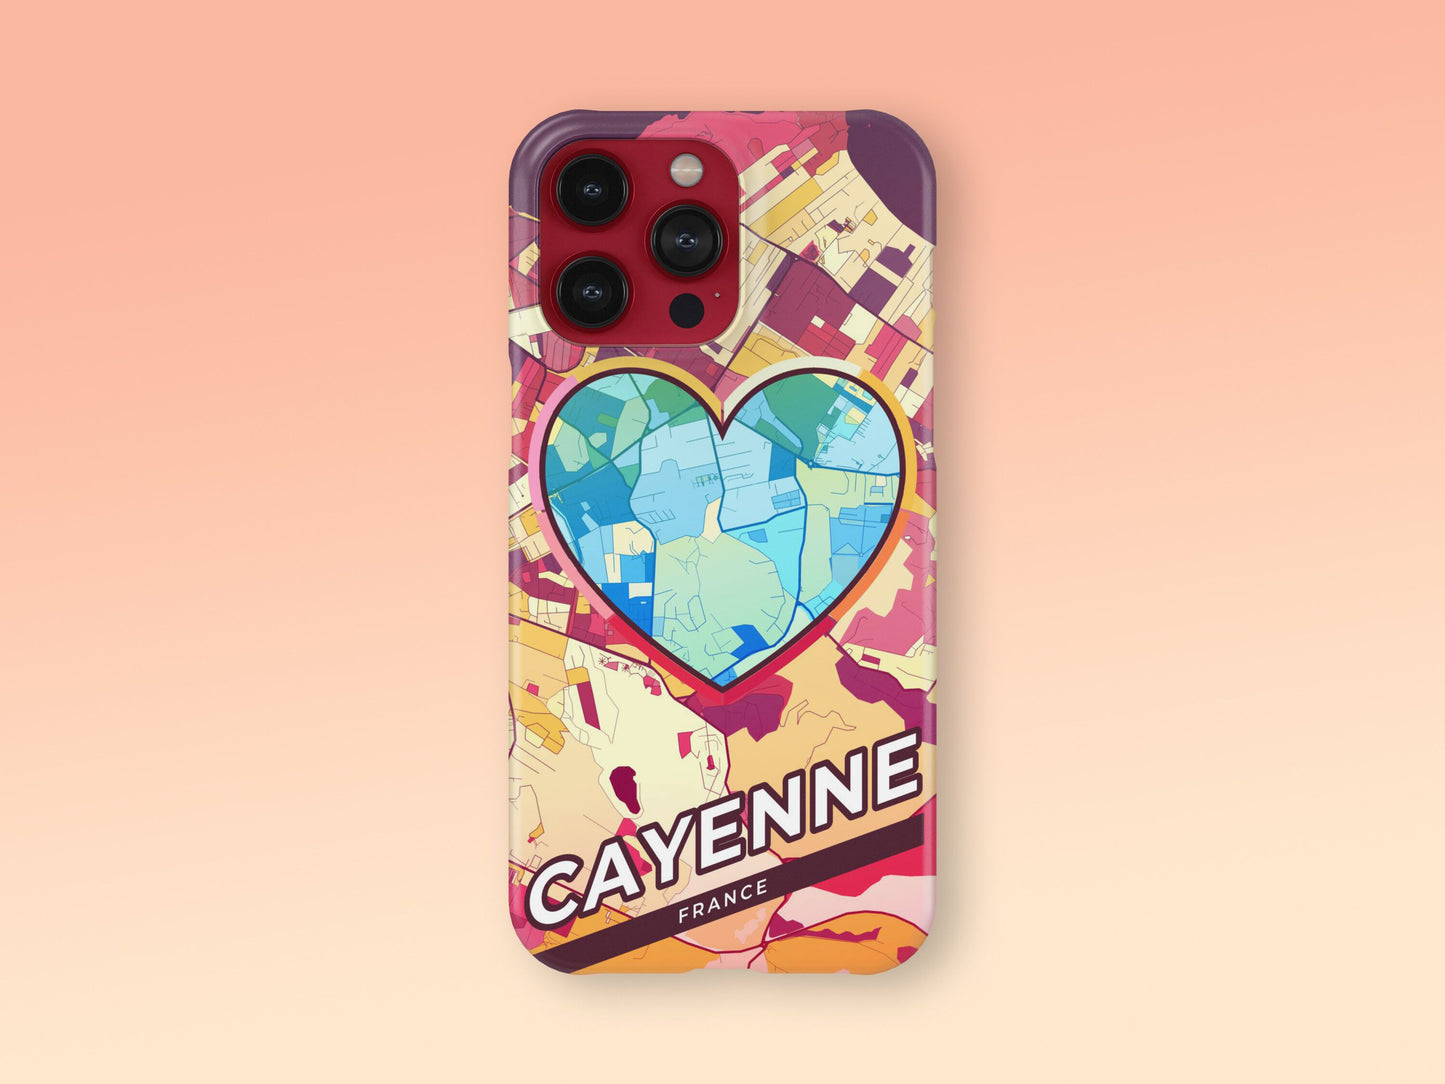 Cayenne France slim phone case with colorful icon. Birthday, wedding or housewarming gift. Couple match cases. 2